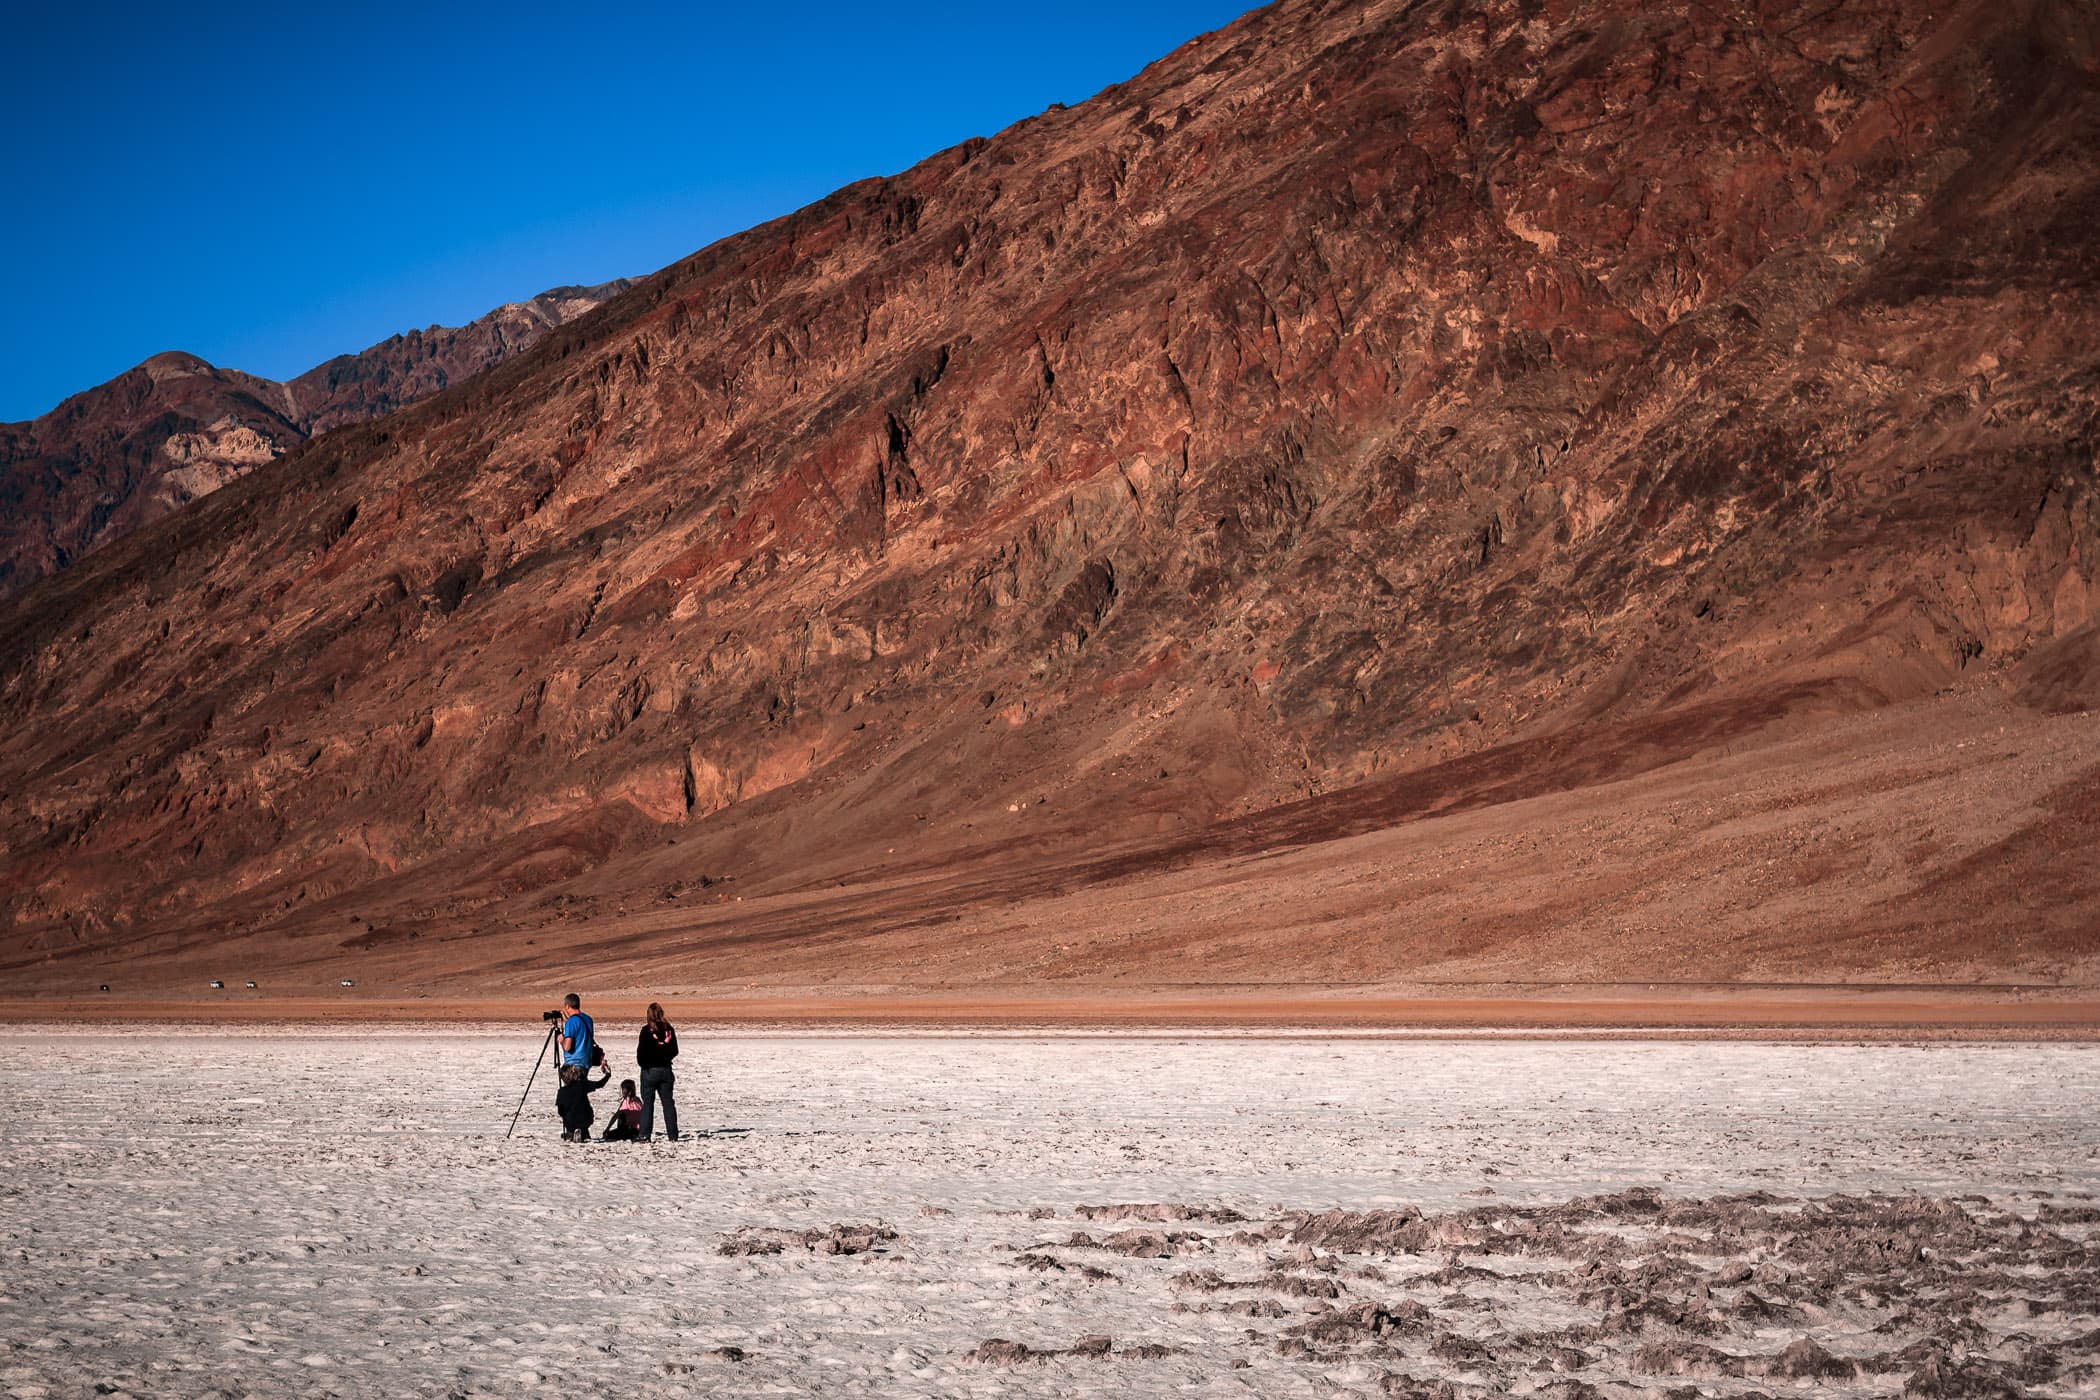 A fellow photographer takes a shot at Badwater Basin, Death Valley, California.